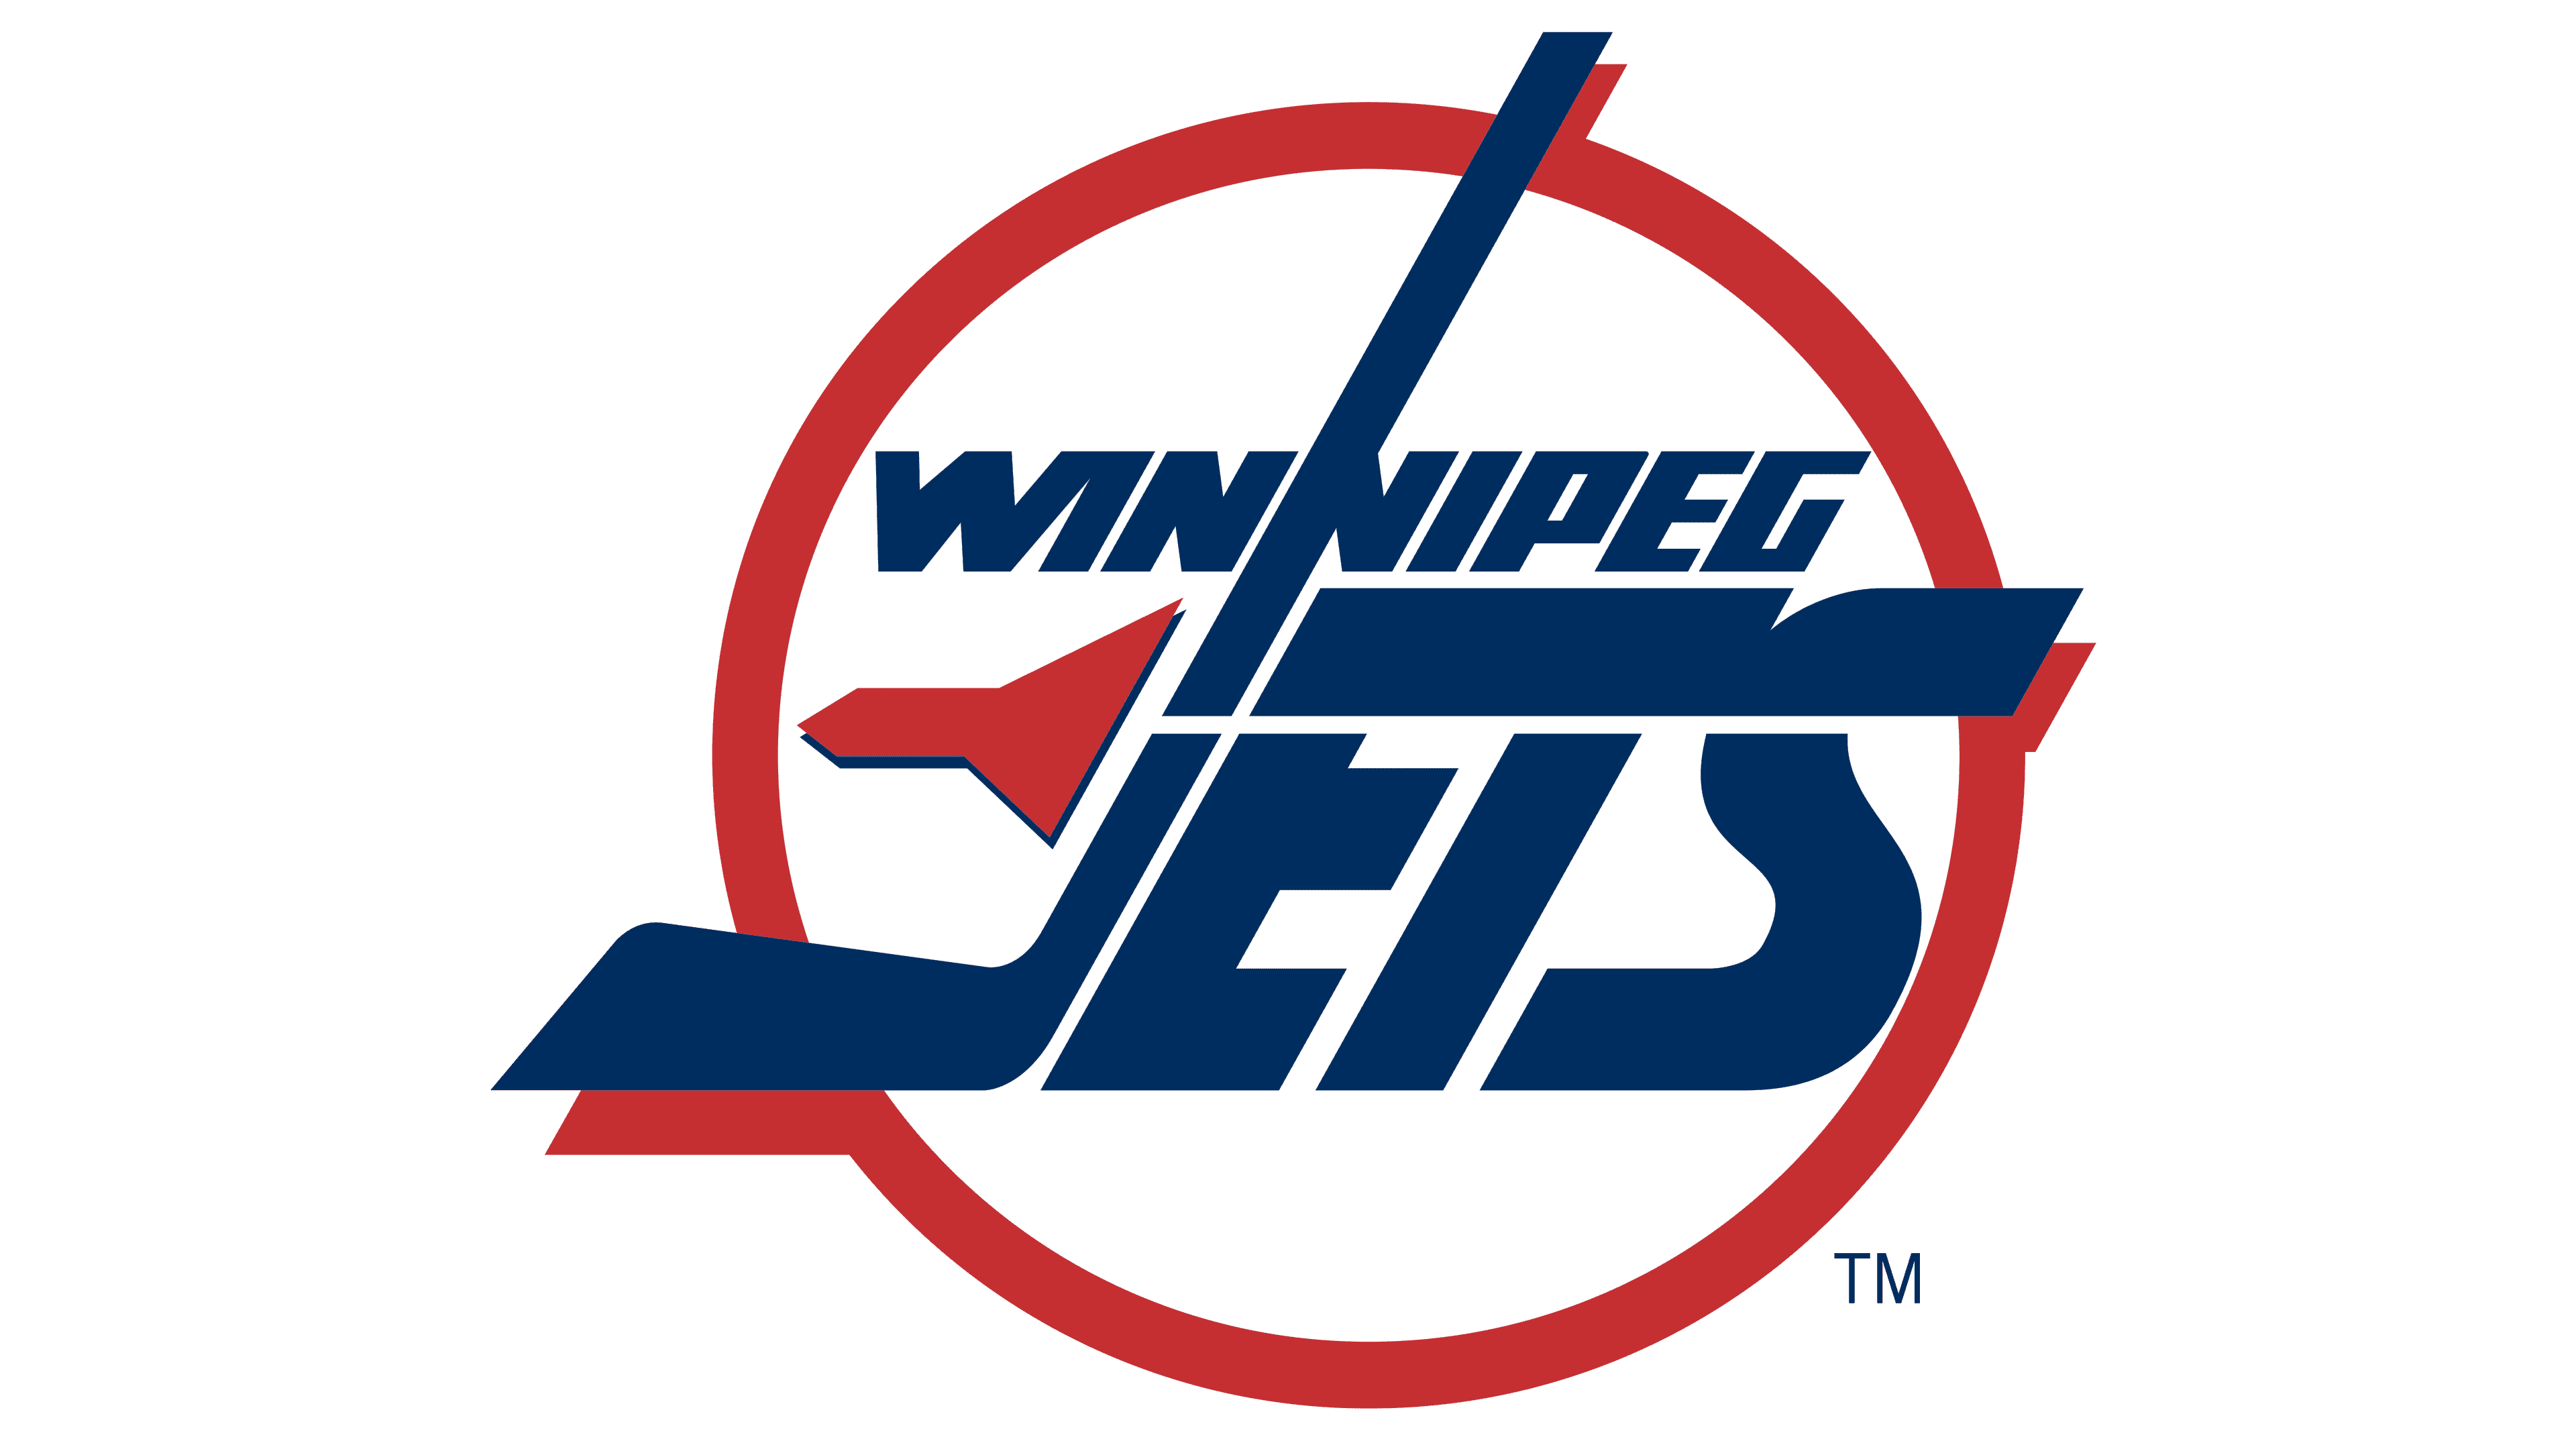 Marek: What If The Coyotes Preyed On Wright? – Cheering The Logo